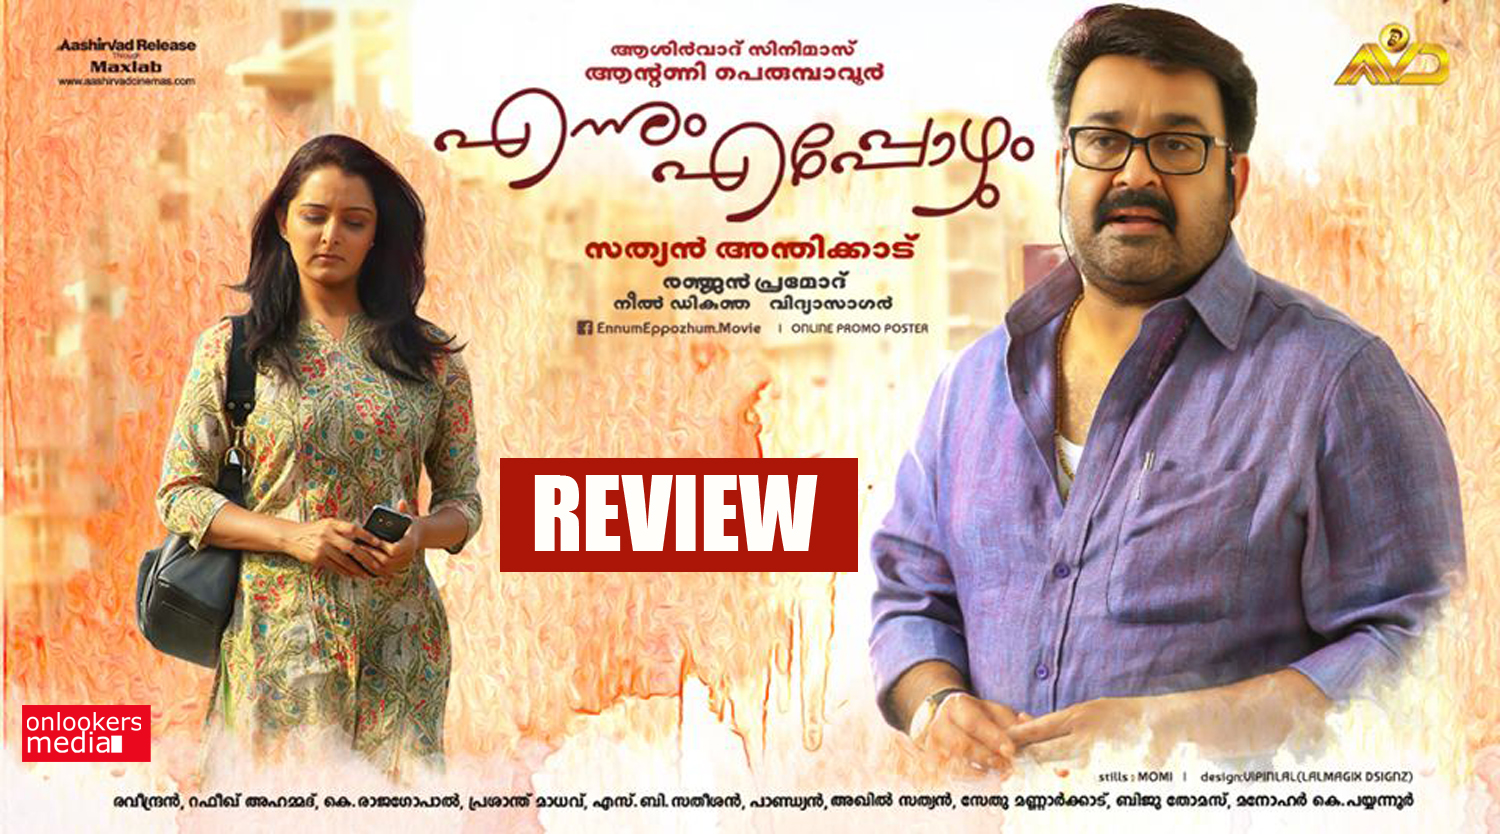 Ennum Eppozhum Review-Rating-Collection Report-Malayalam Movie 2015-Mohanlal-Manju Warrier-Onlookers Media